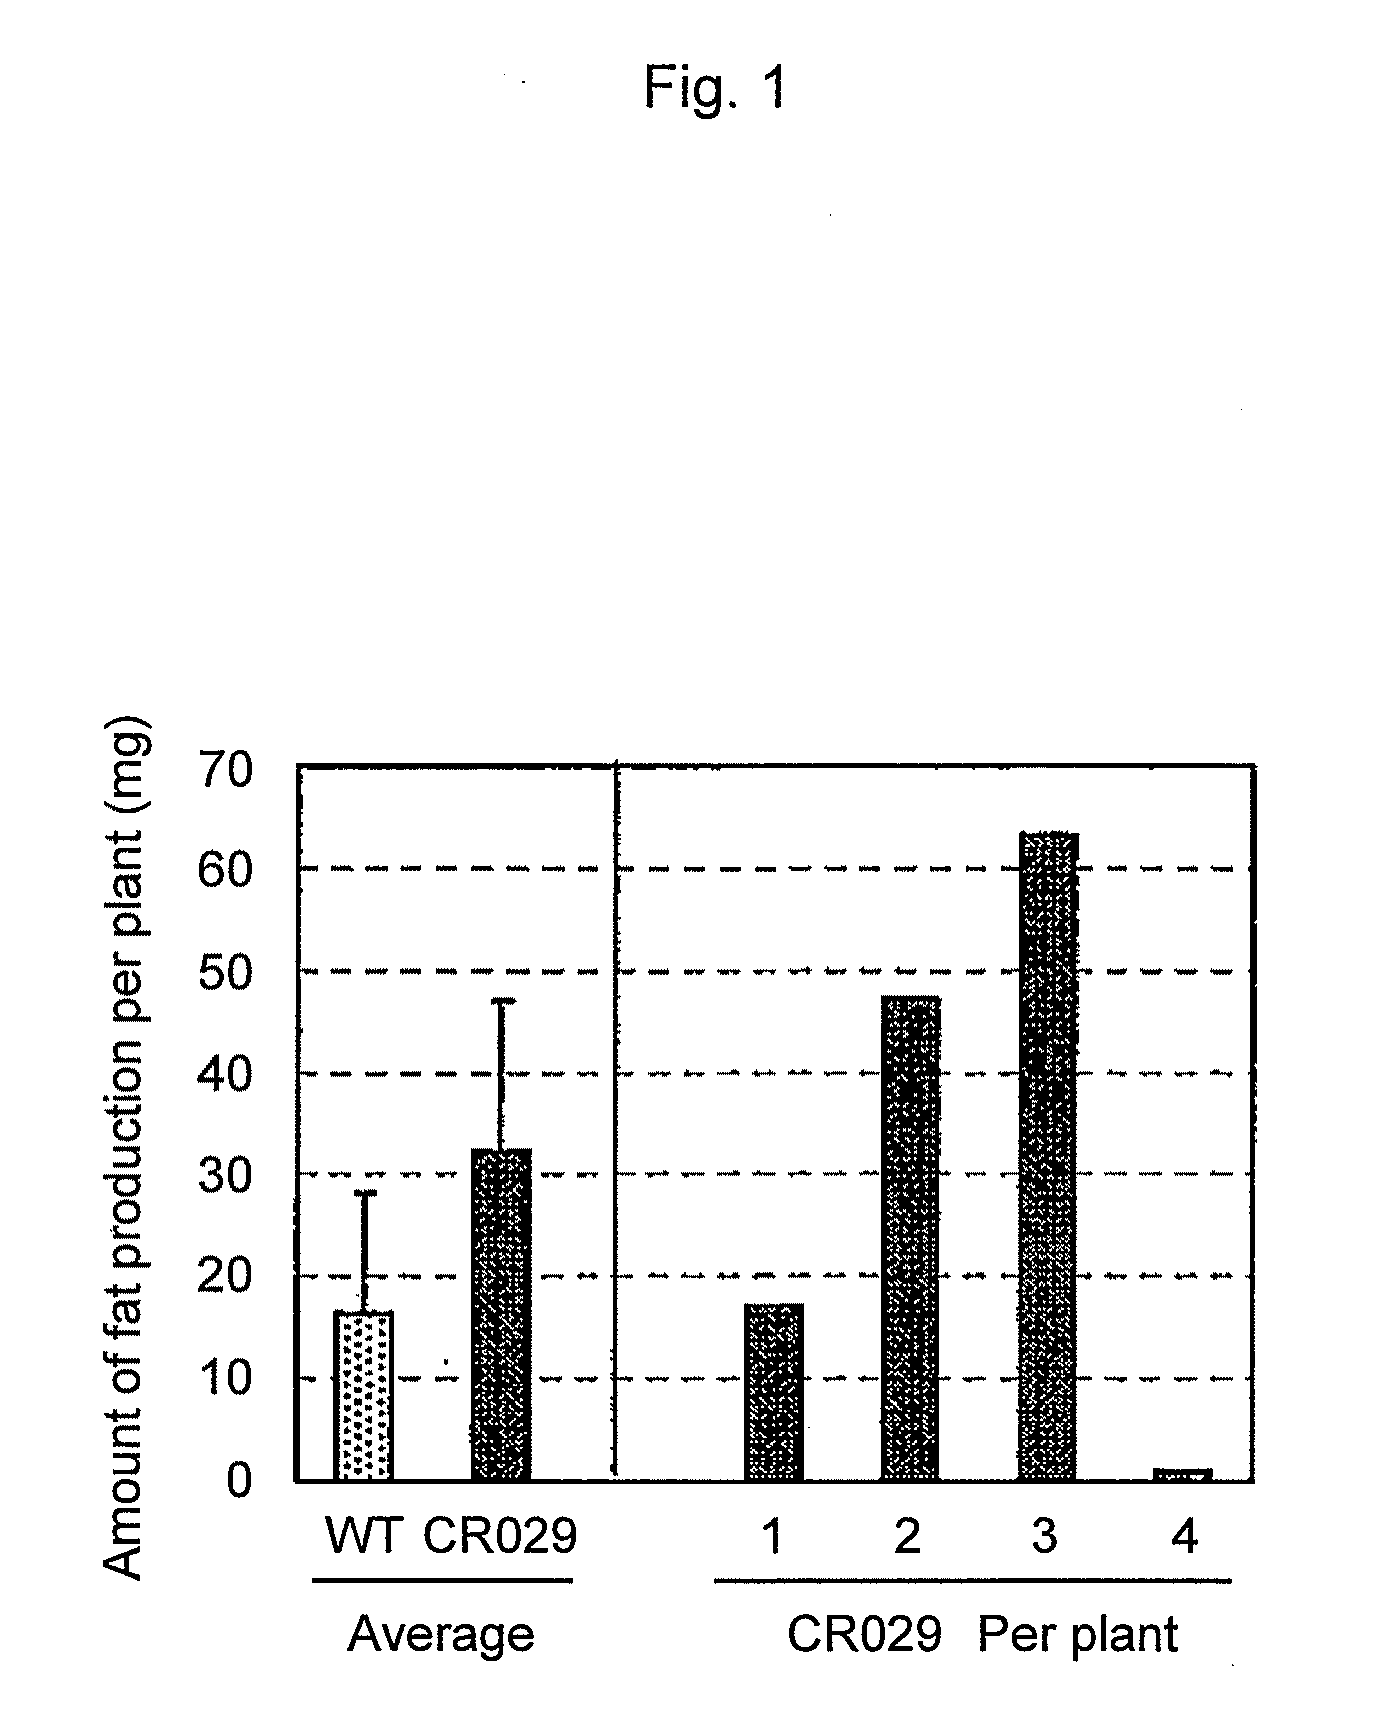 Genes that increase plant oil and method for using the same